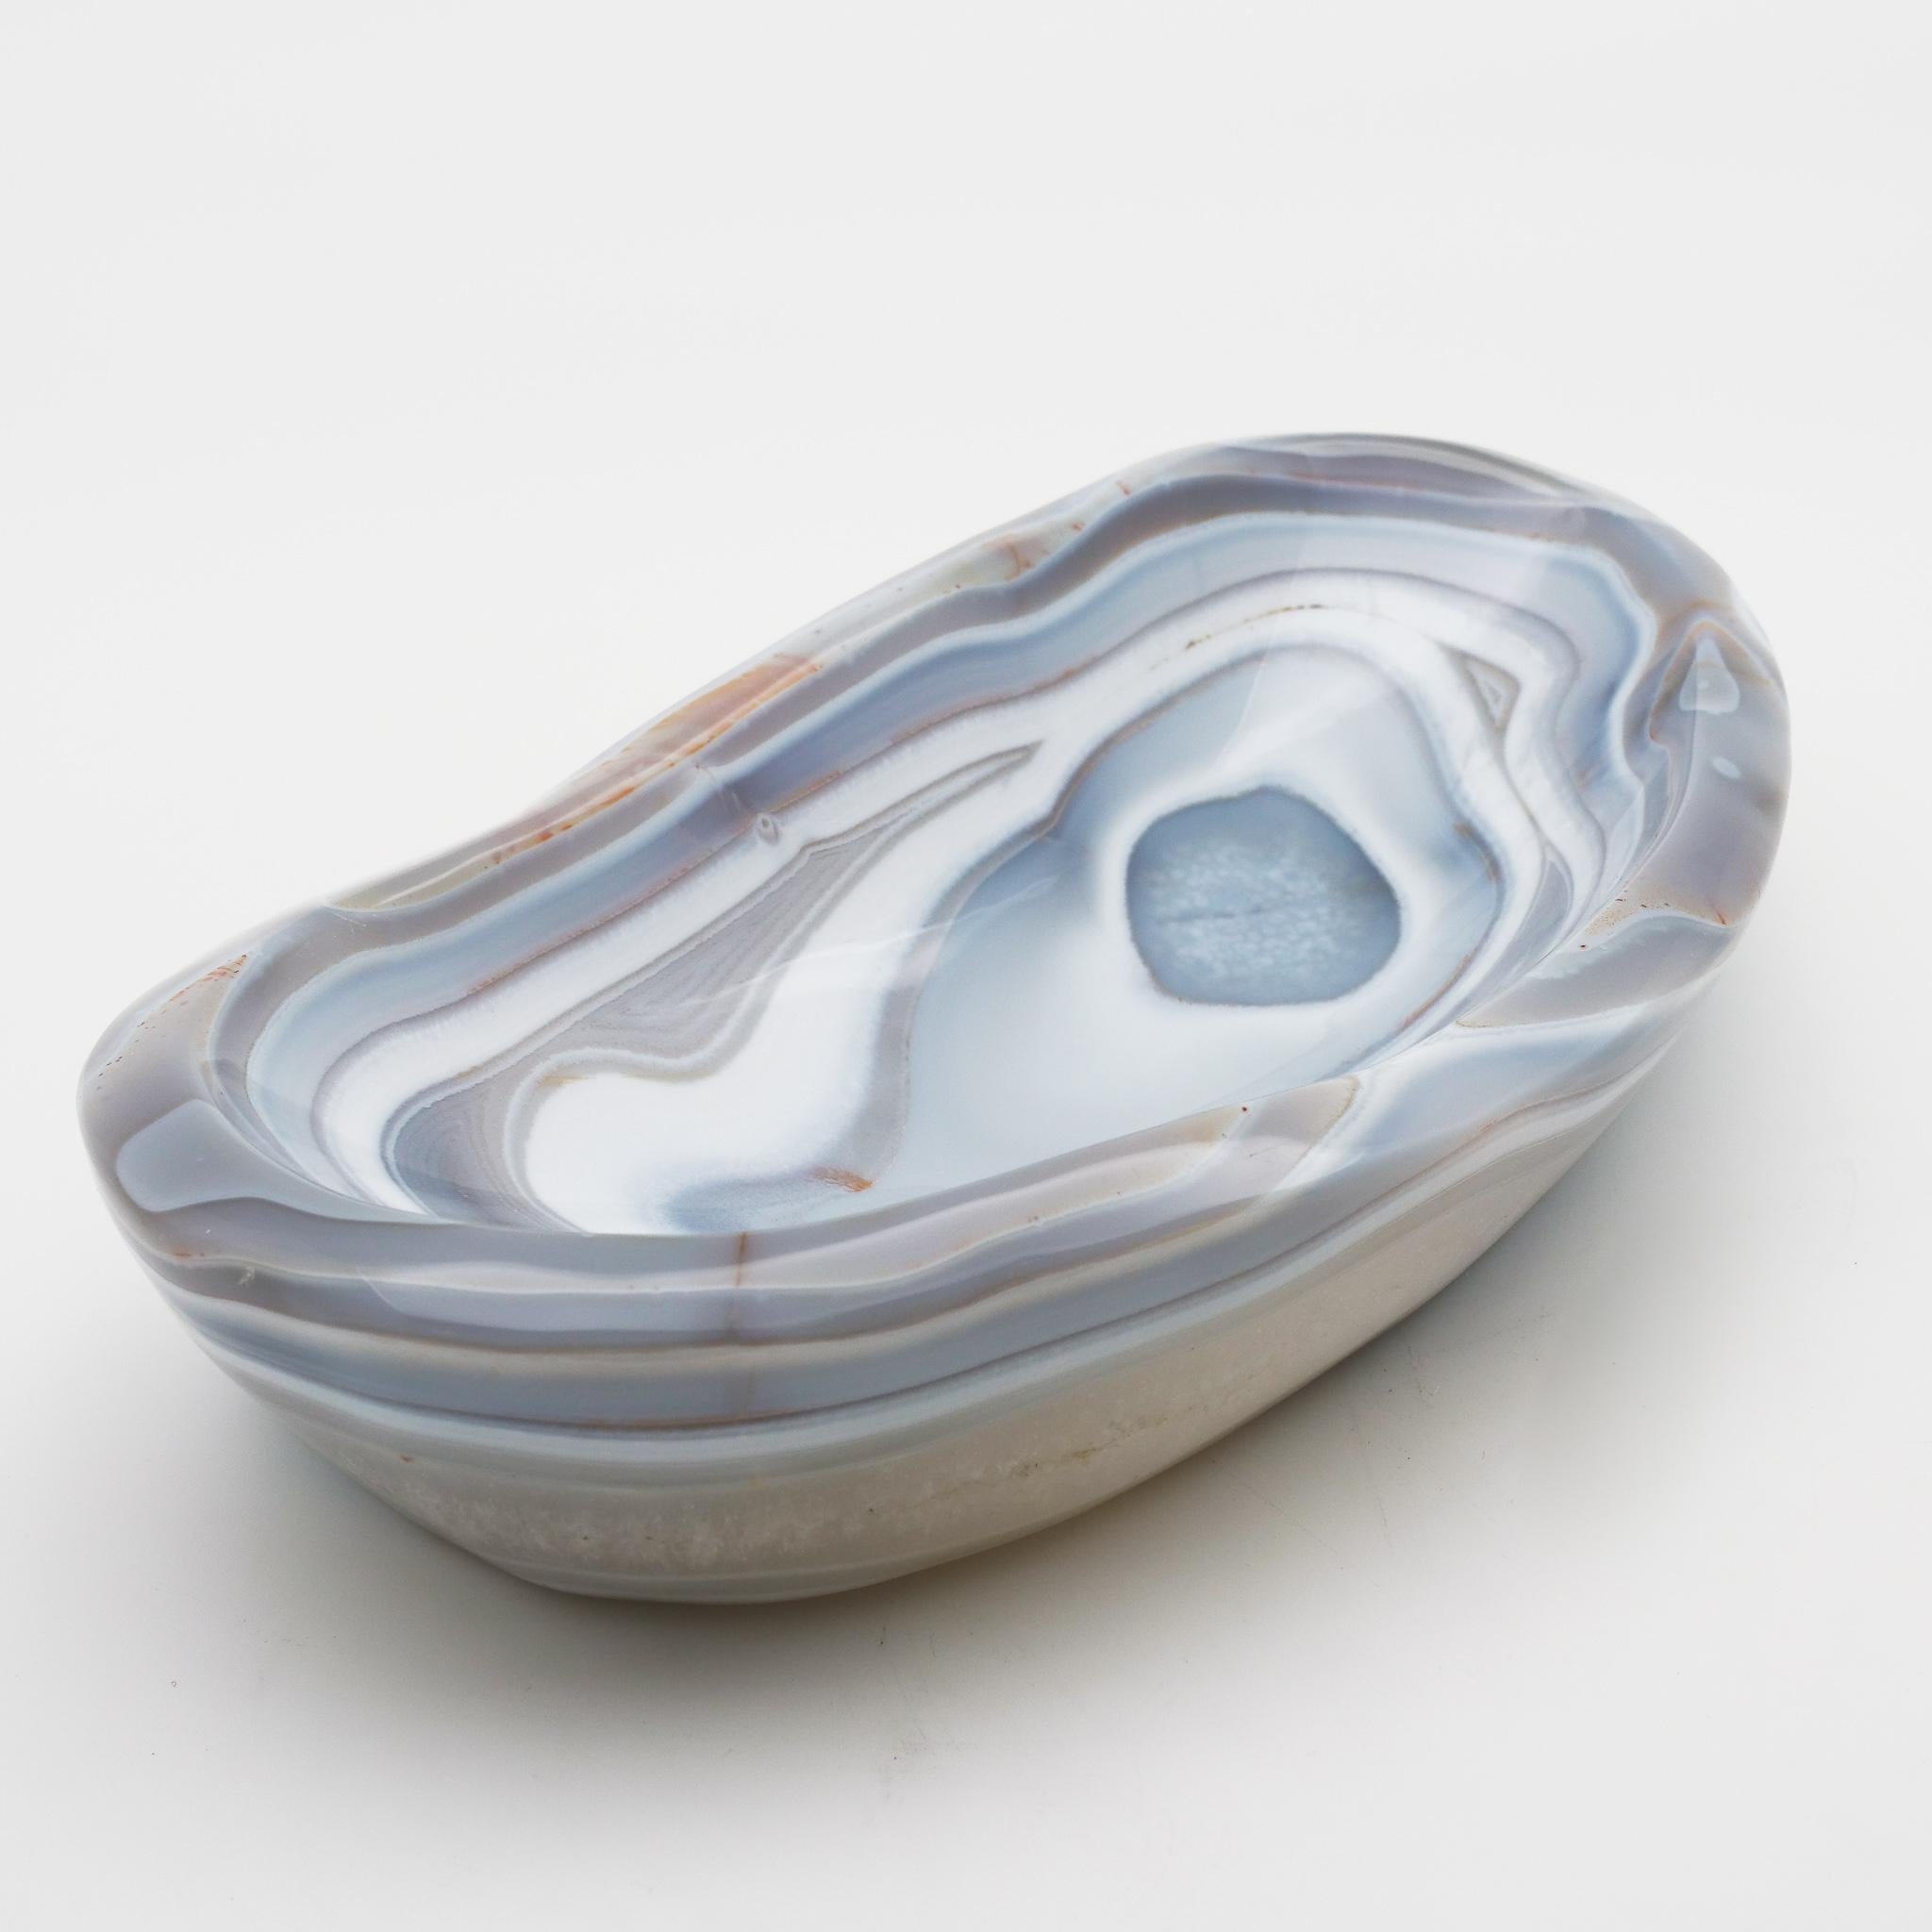 Beautiful, hand carved agate vide-poche from Madagascar, selected for its broad spectrum of colors and unusually large size. A very impressive desk or table item it can also be used as receptacle for keys etc, which is where the name vide-poche